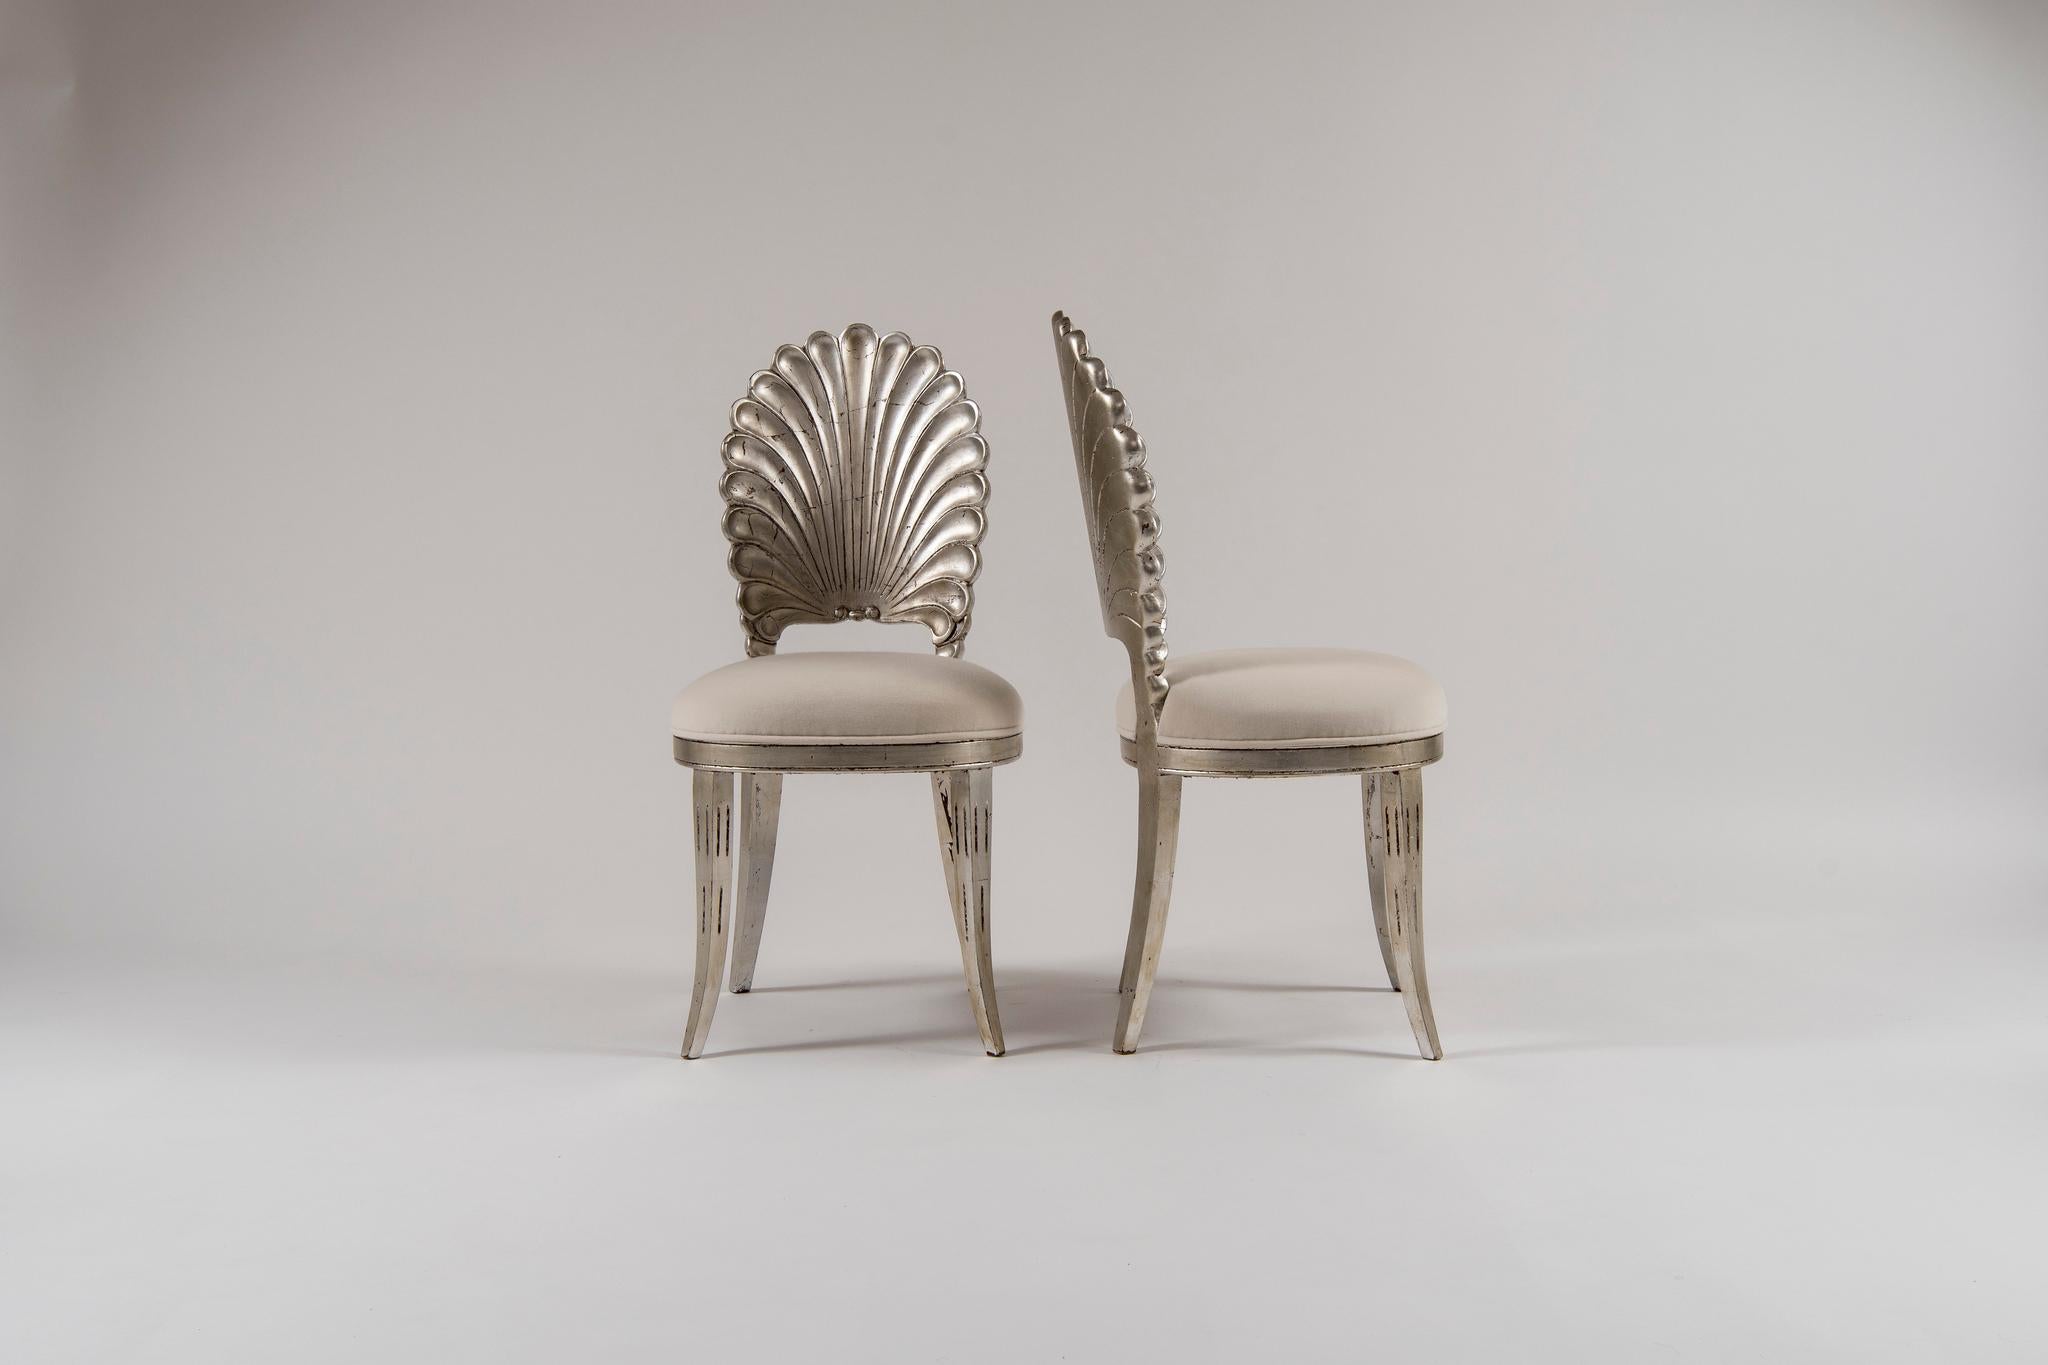 A 20th century silver gilded Italian shell back chair newly upholstered in a white creamy low pile velvet. Two available, sold individually.